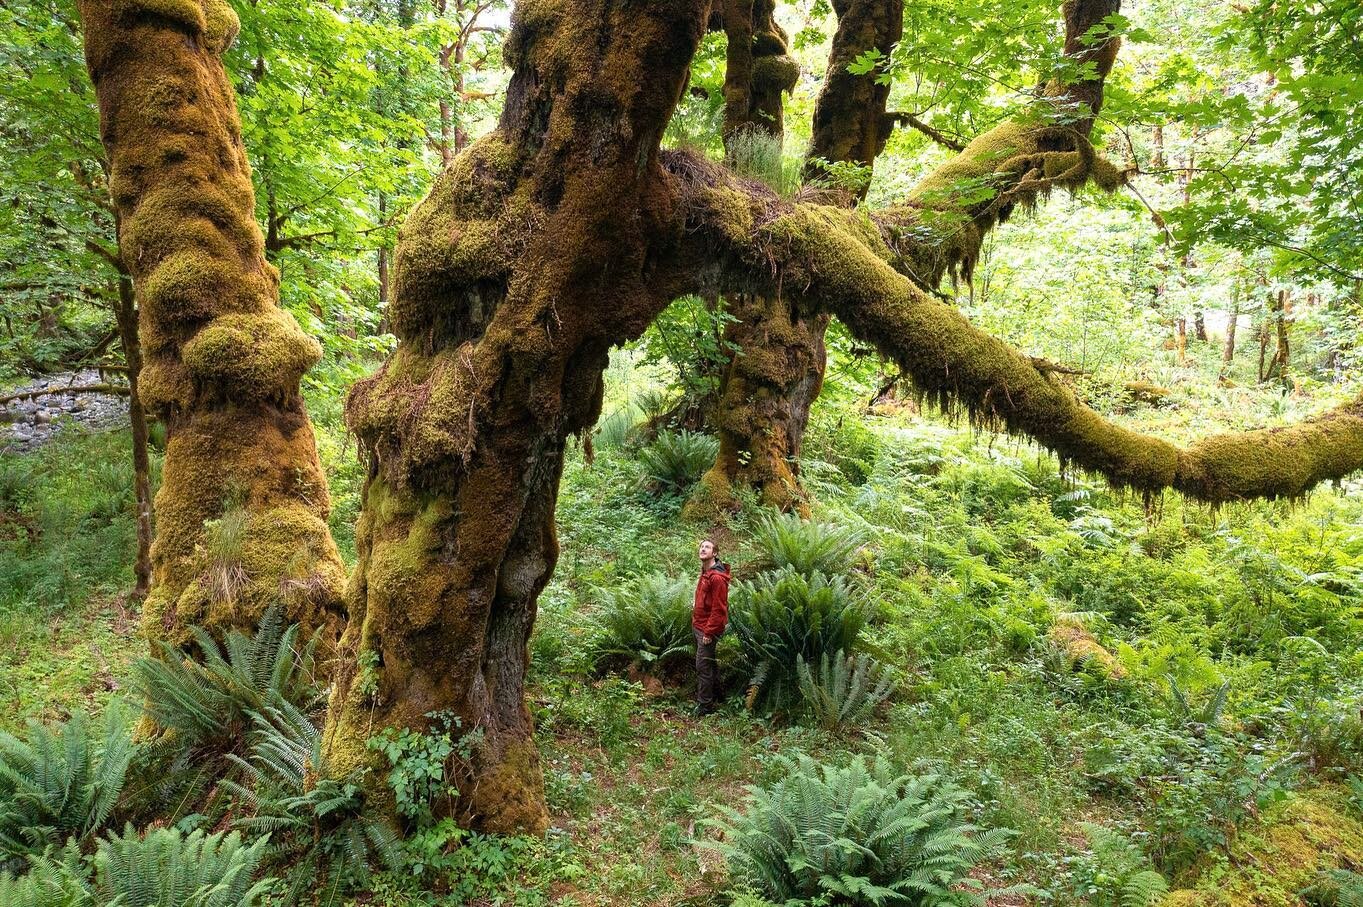 Springtime in the luscious Mossy Maple Grove west of Lake Cowichan in Hul&rsquo;q&rsquo;umi'num territory. This rare and spectacular grove is home to super shaggy old-growth bigleaf maple trees adorned with thick mats of hanging moss. Bigleaf maple t